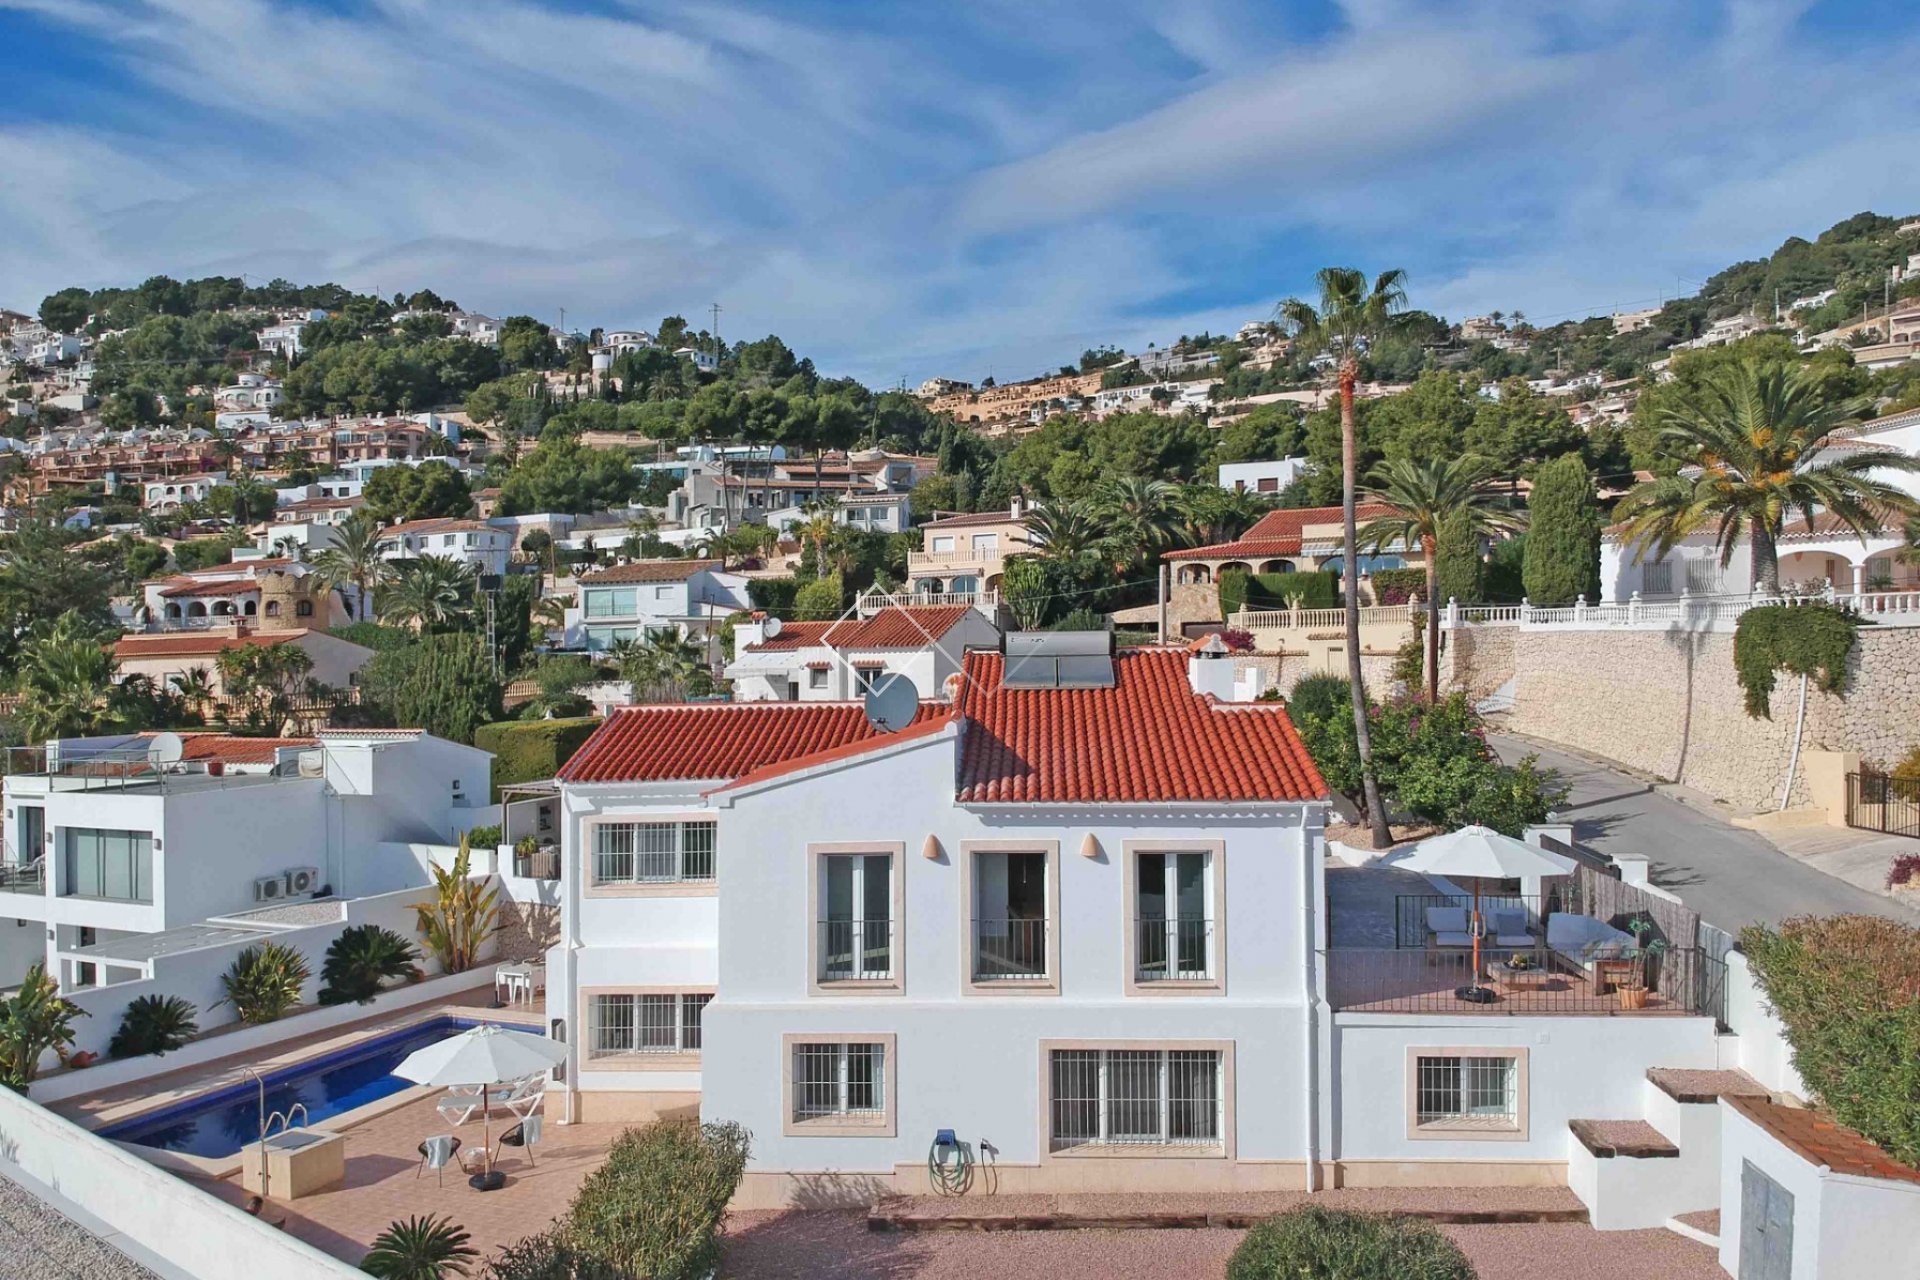 Large villa on hill side - Beautiful villa with sea view for sale in Benimeit, Moraira